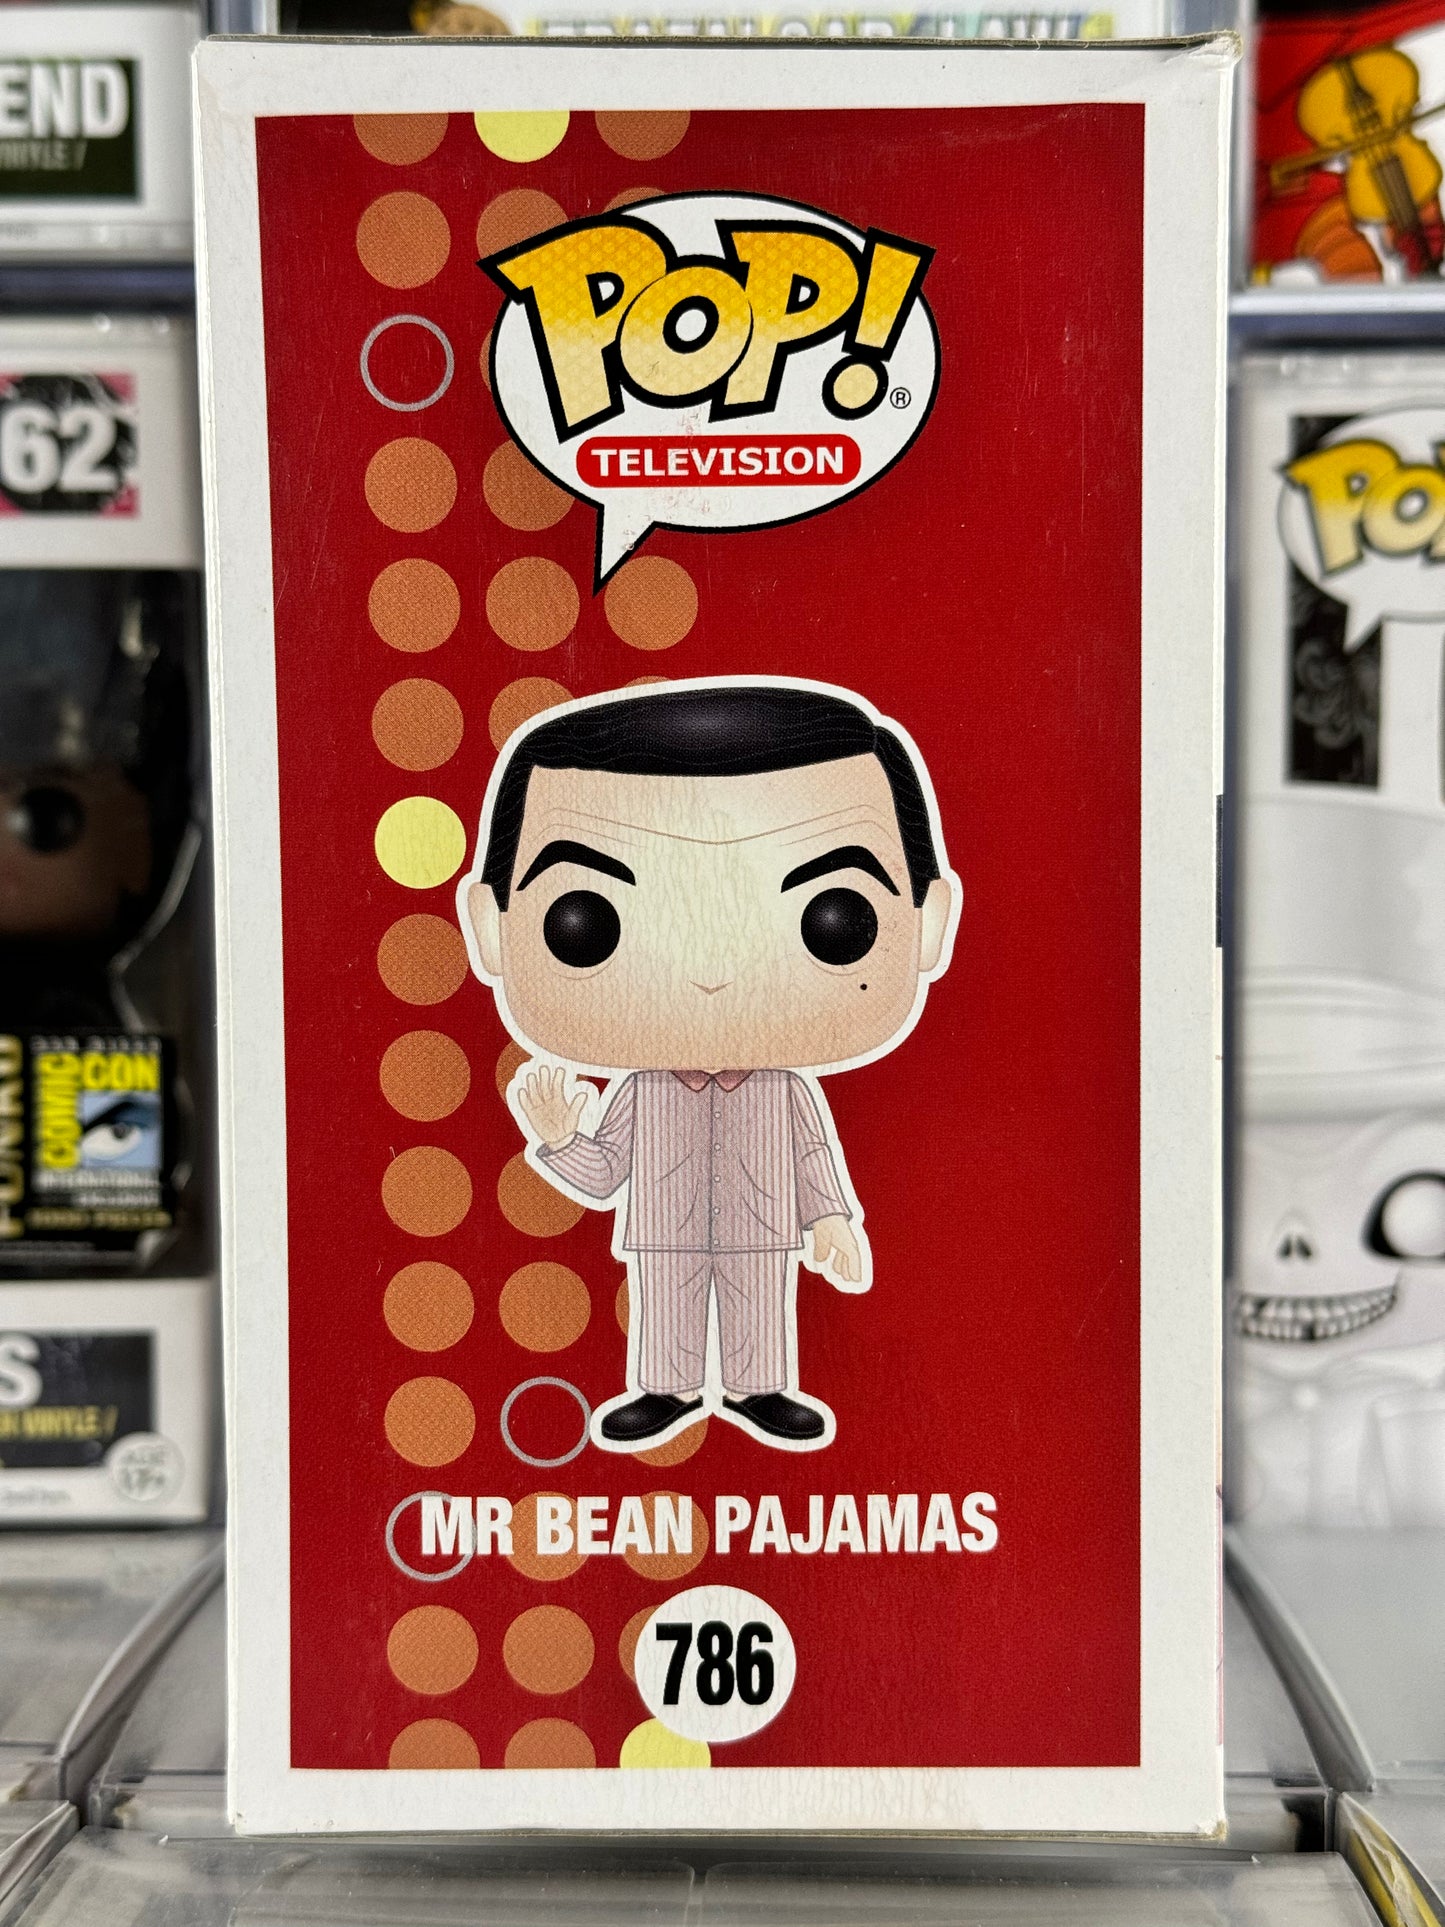 Mr. Bean - Mr. Bean in Pajamas (786) Vaulted CHASE